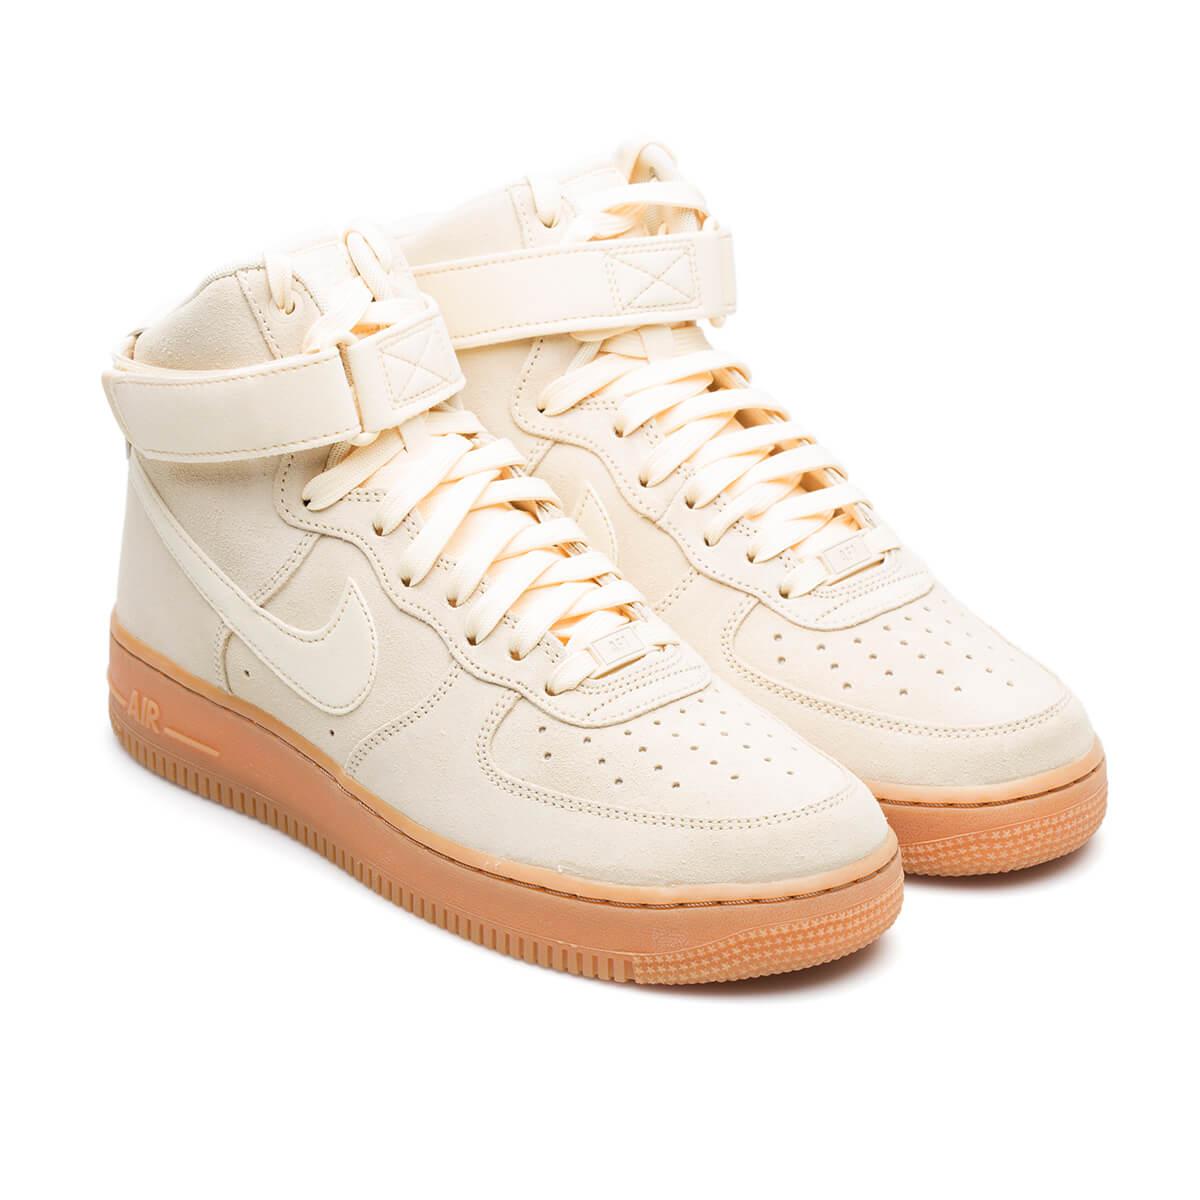 Nike Air Force 1 High '07 Lv8 Suede in White for Men - Lyst